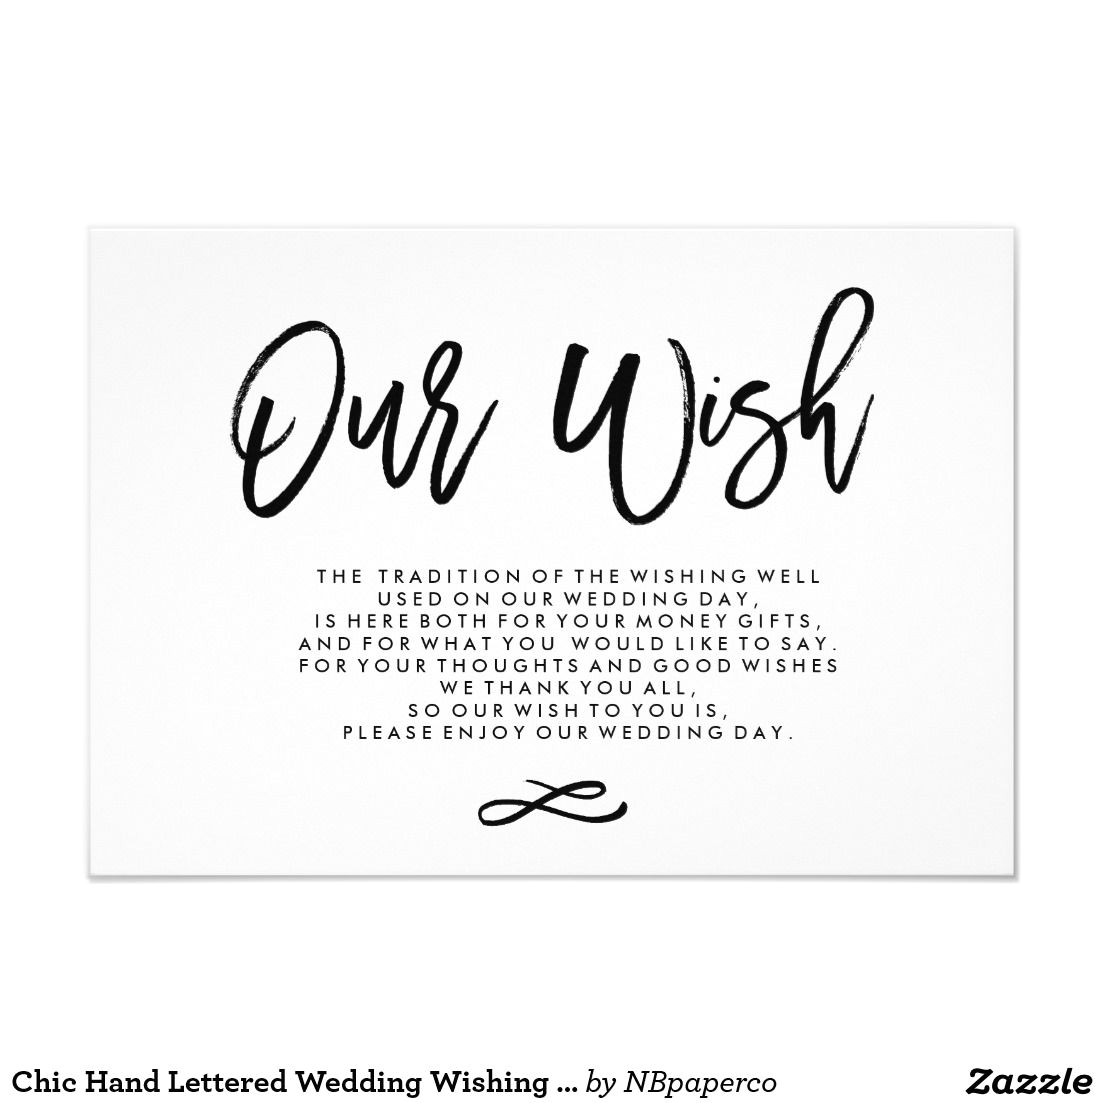 Card Verses for Wedding Day Chic Hand Lettered Wedding Wishing Well Enclosure Card